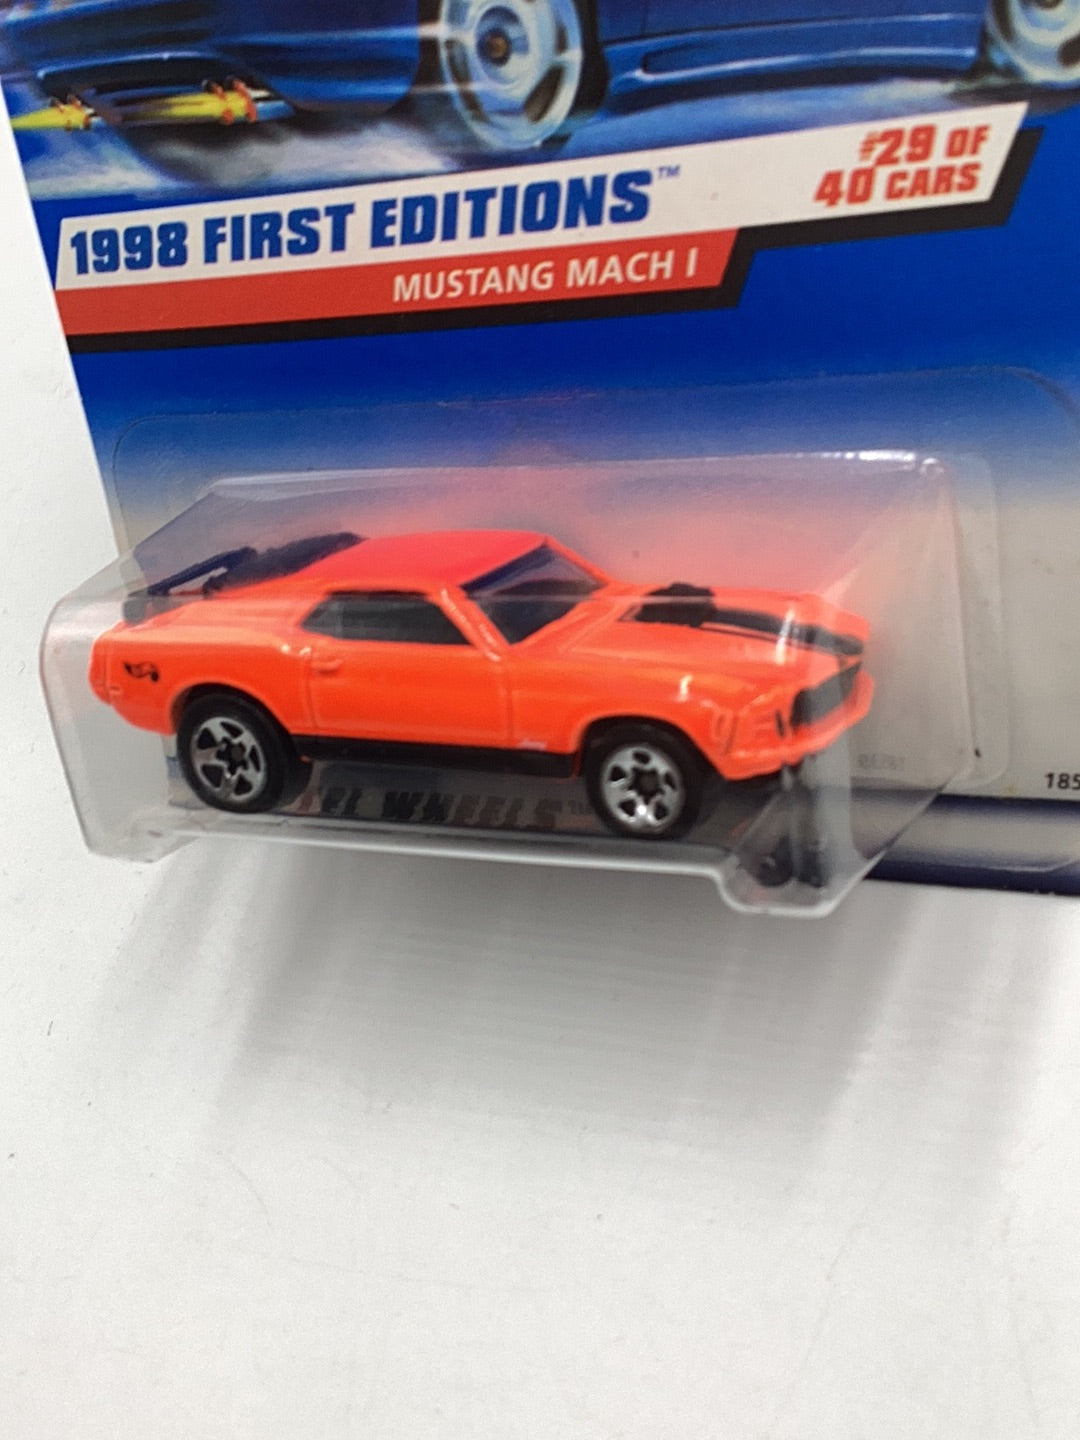 1998 hot wheels #670 Mustang Mach 1 Orange tough color to find with protector